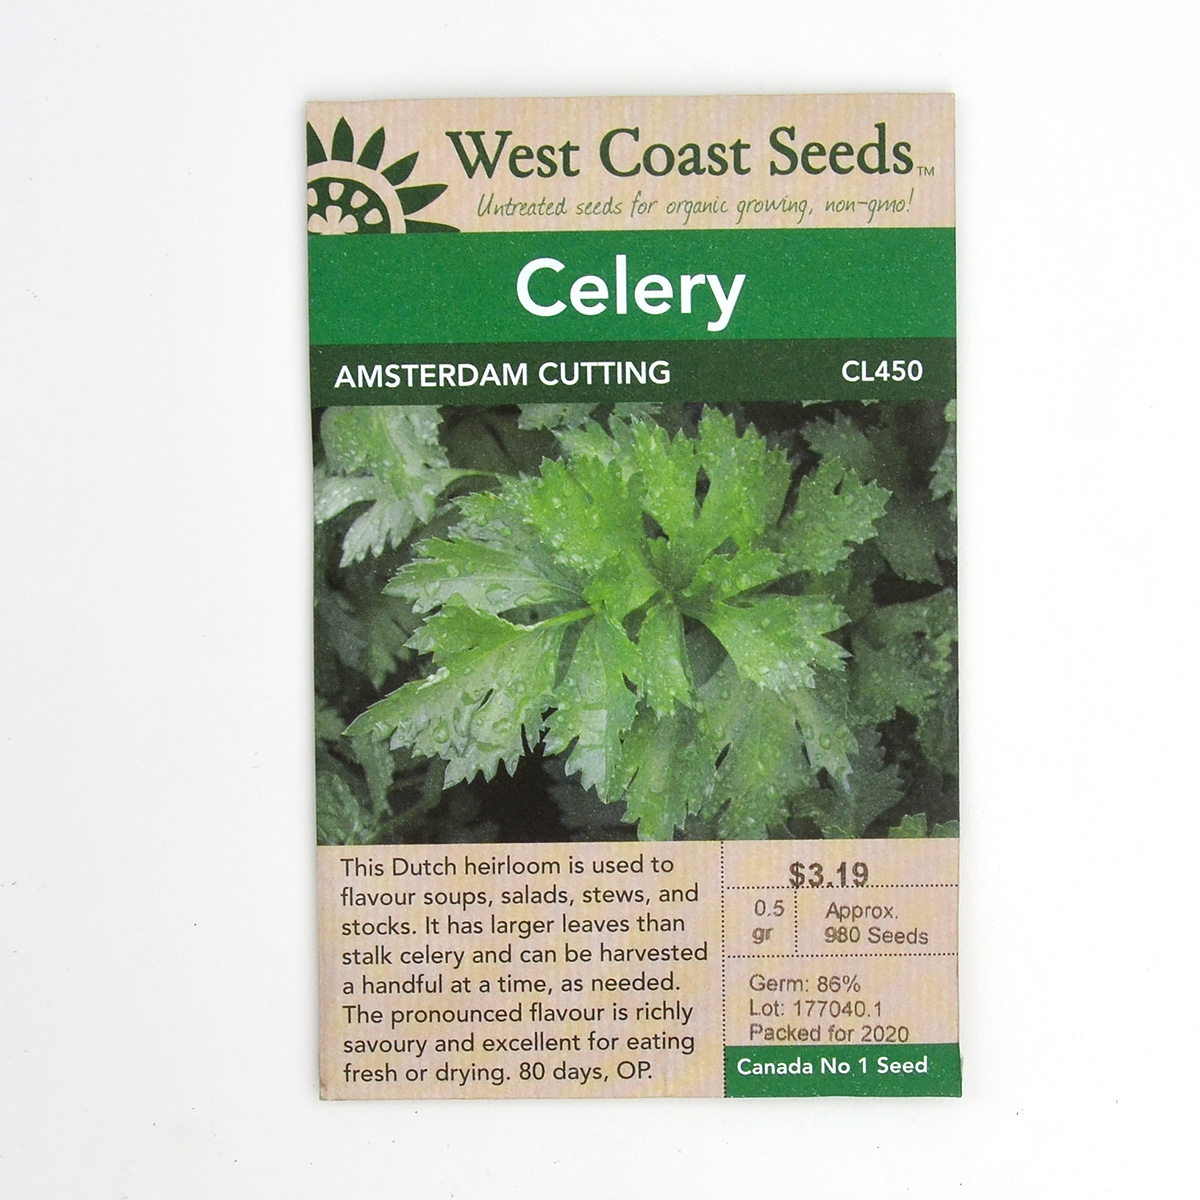 Celery Amsterdam Cutting Seeds CL450